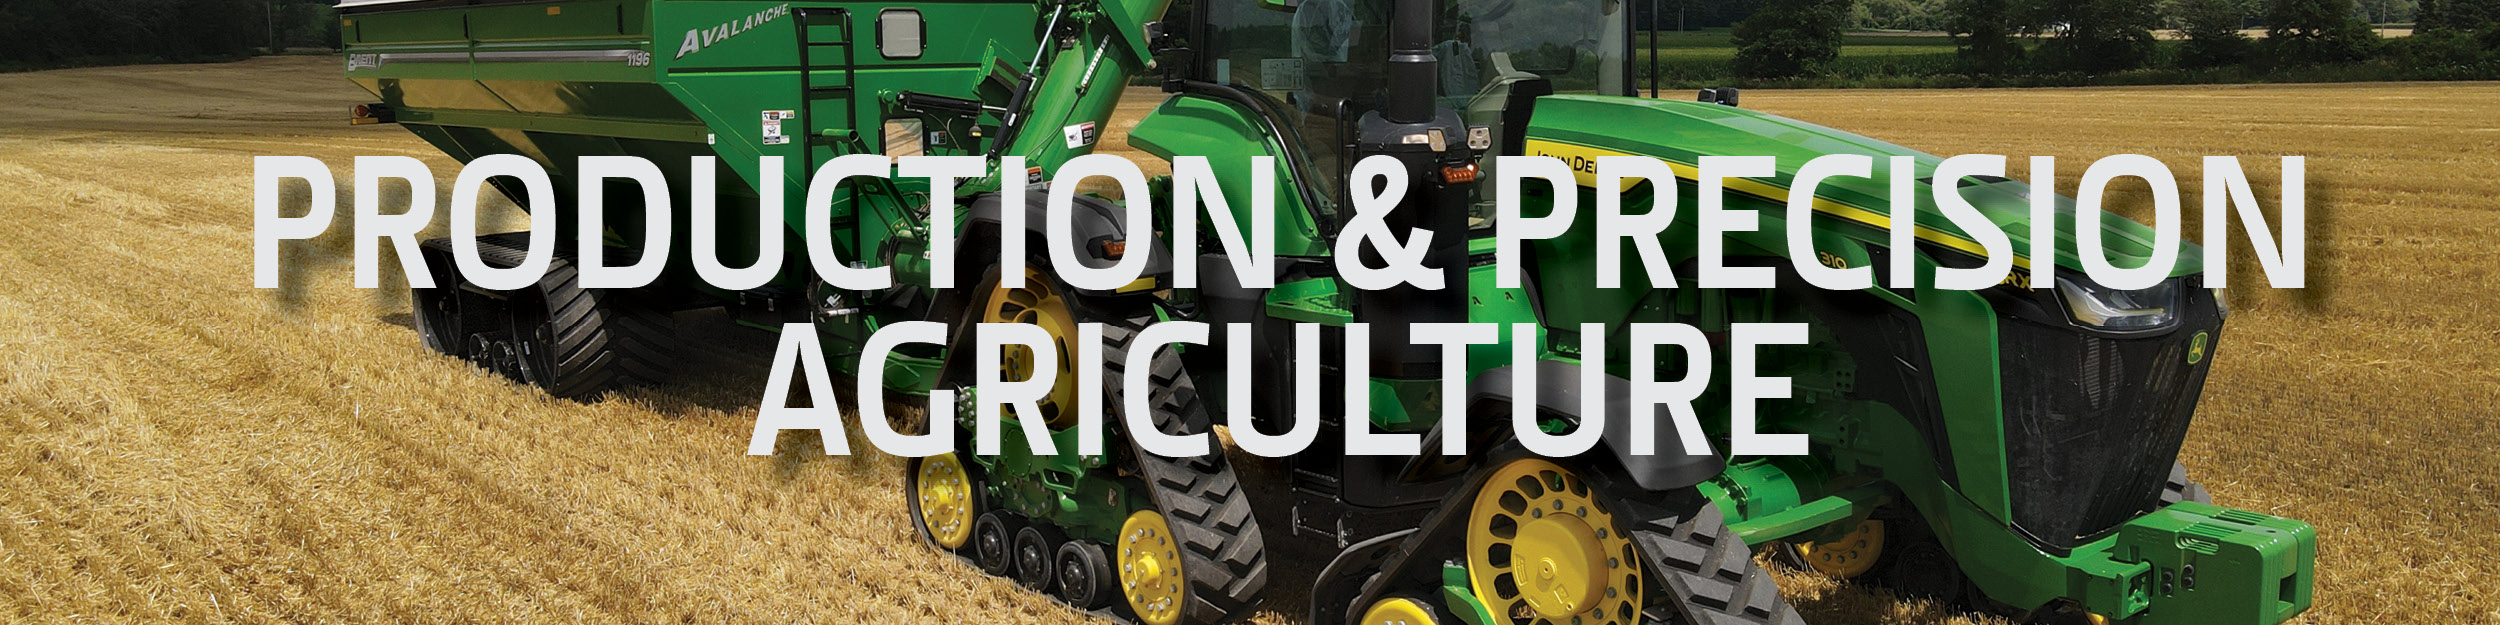 Production and Precision Agriculture